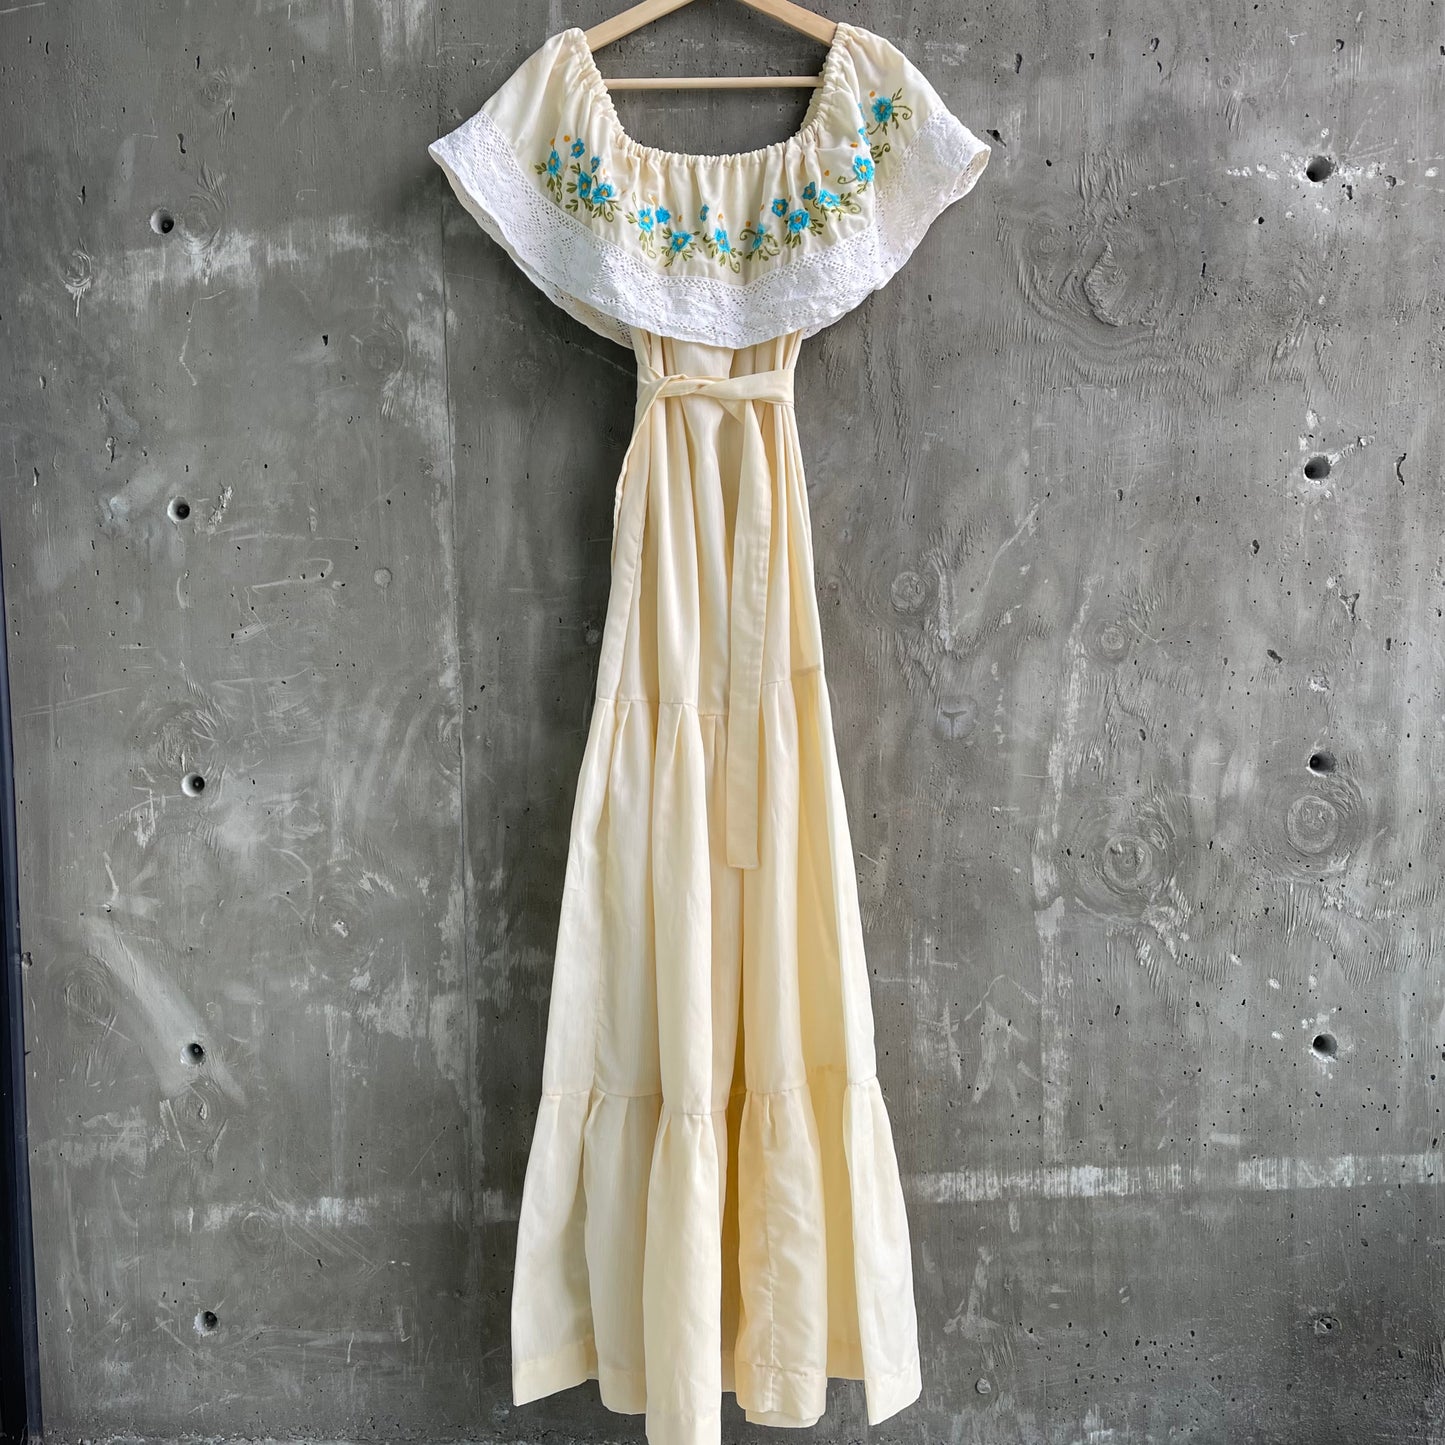 Vintage Traditional Tiered Dress by Hail in Creme with Floral Embroidery